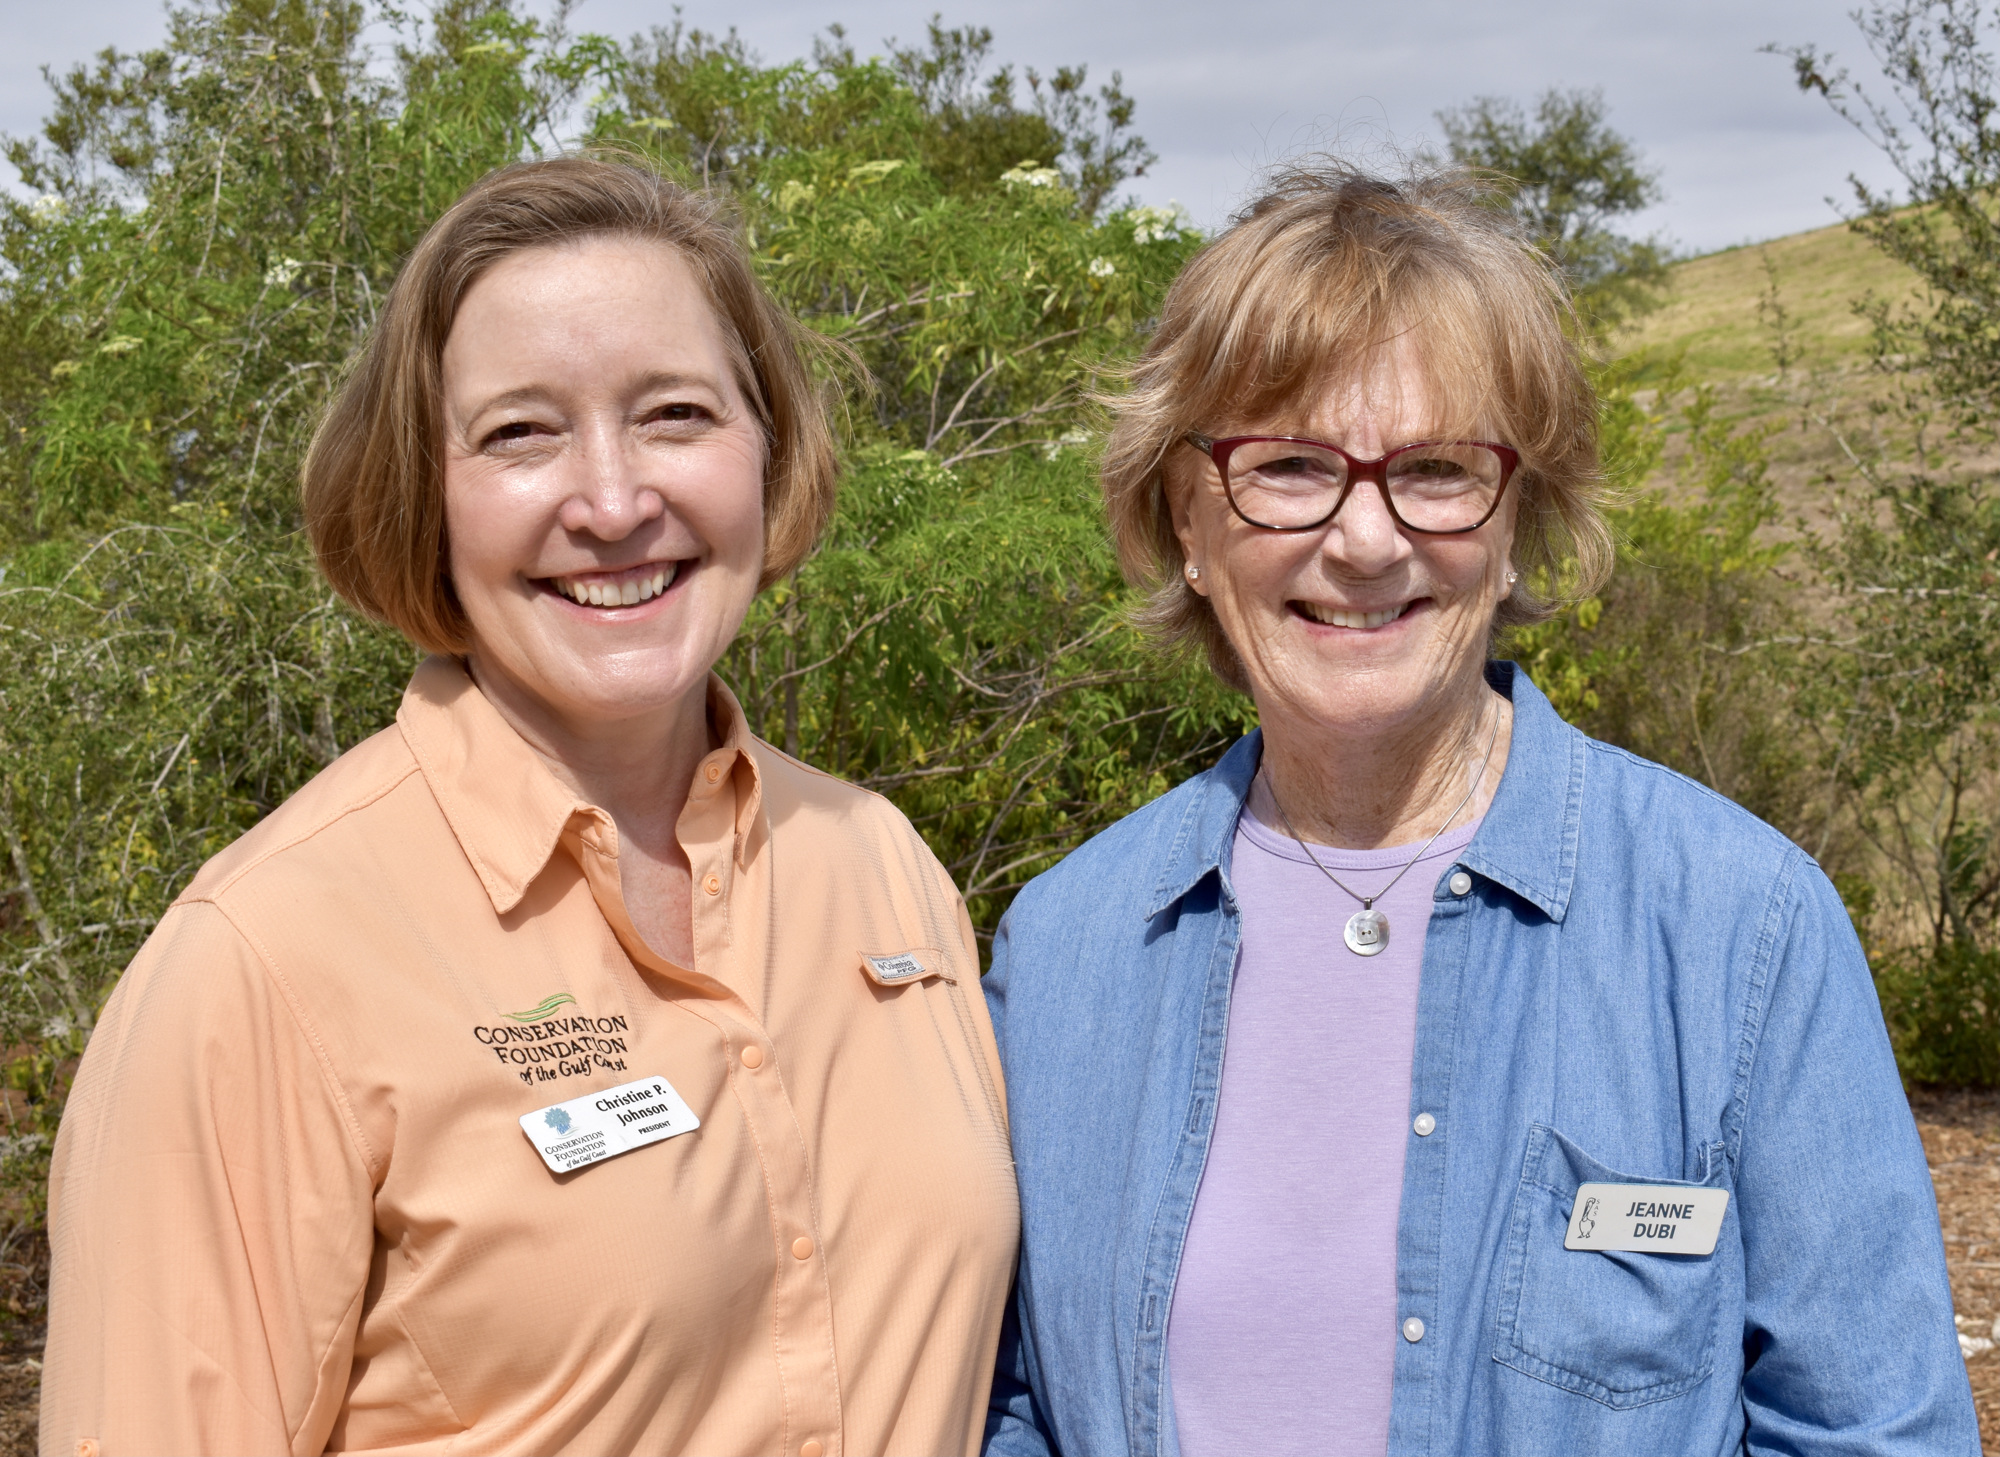 Christine Johnson of the Conservation Foundation and Jeanne Dubi of the Audubon Society.